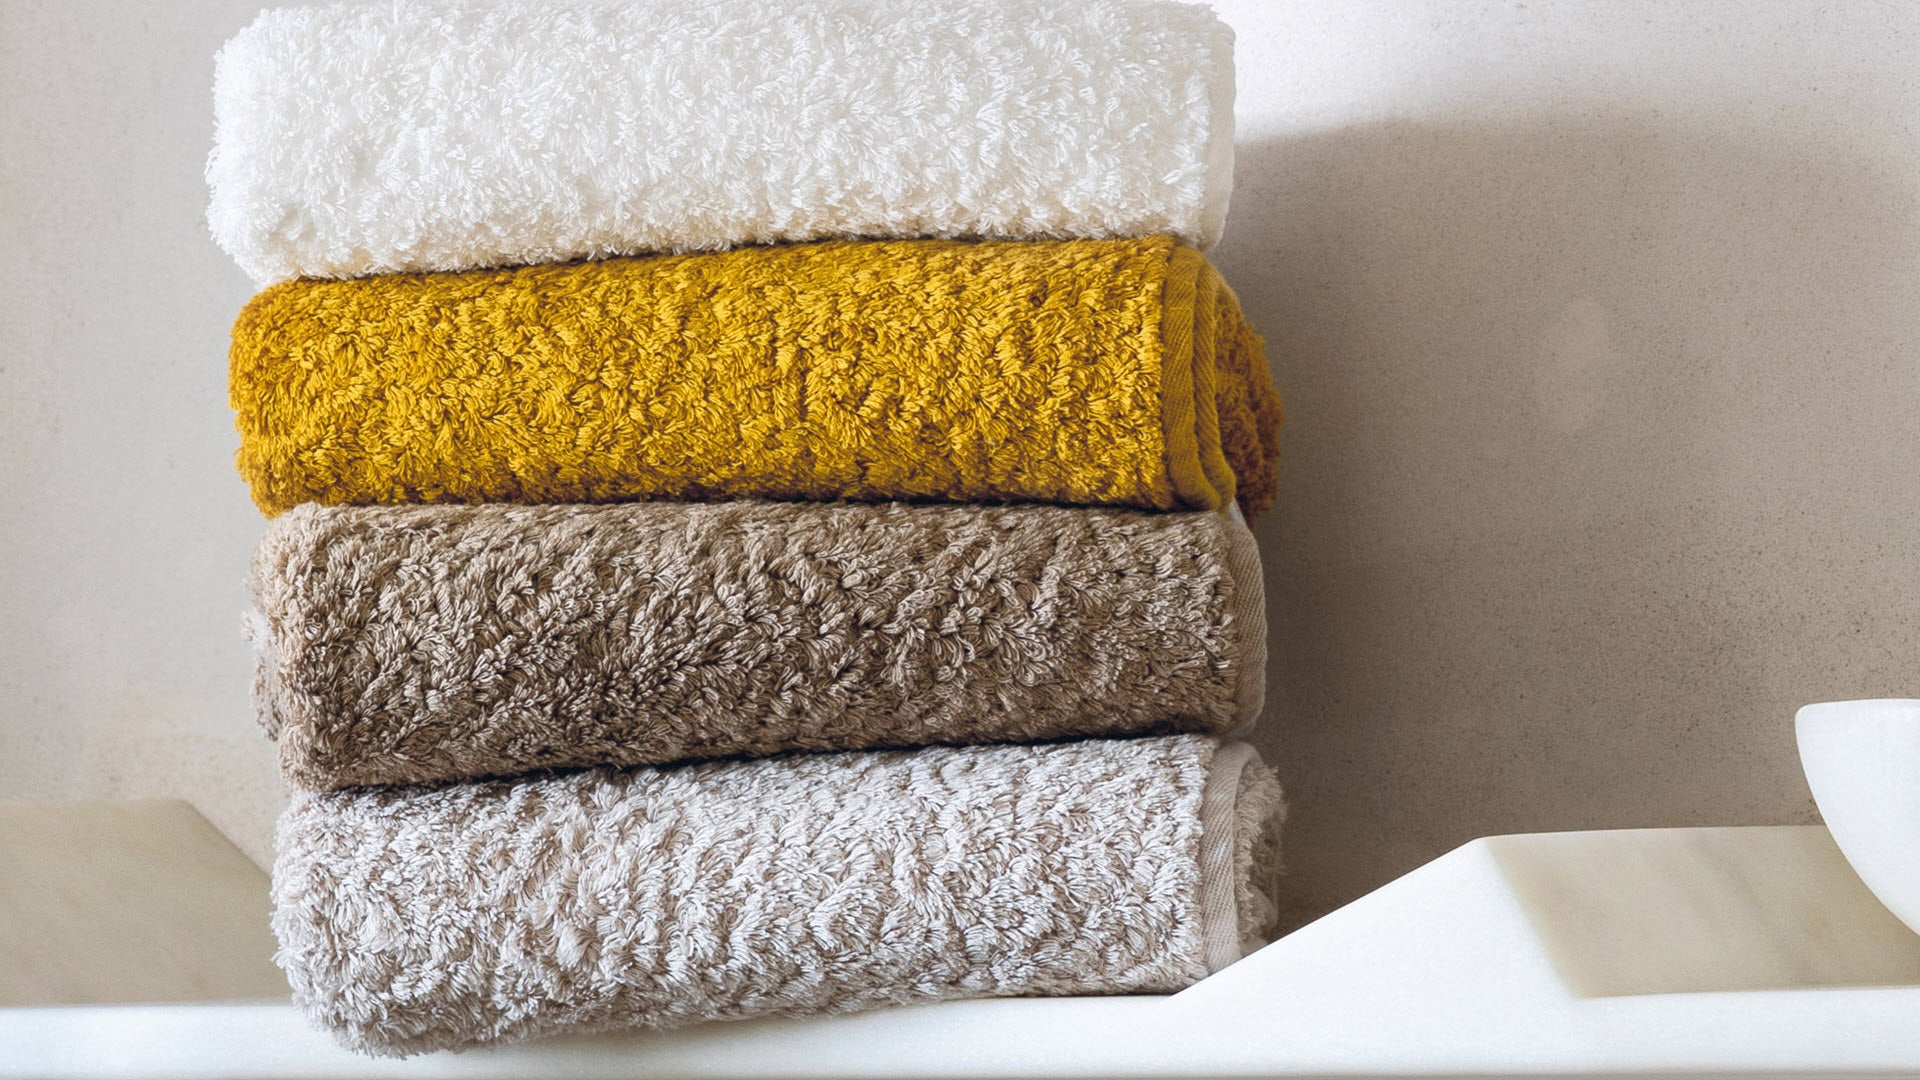 Review of Graccioza's Best Selling Bath Towels